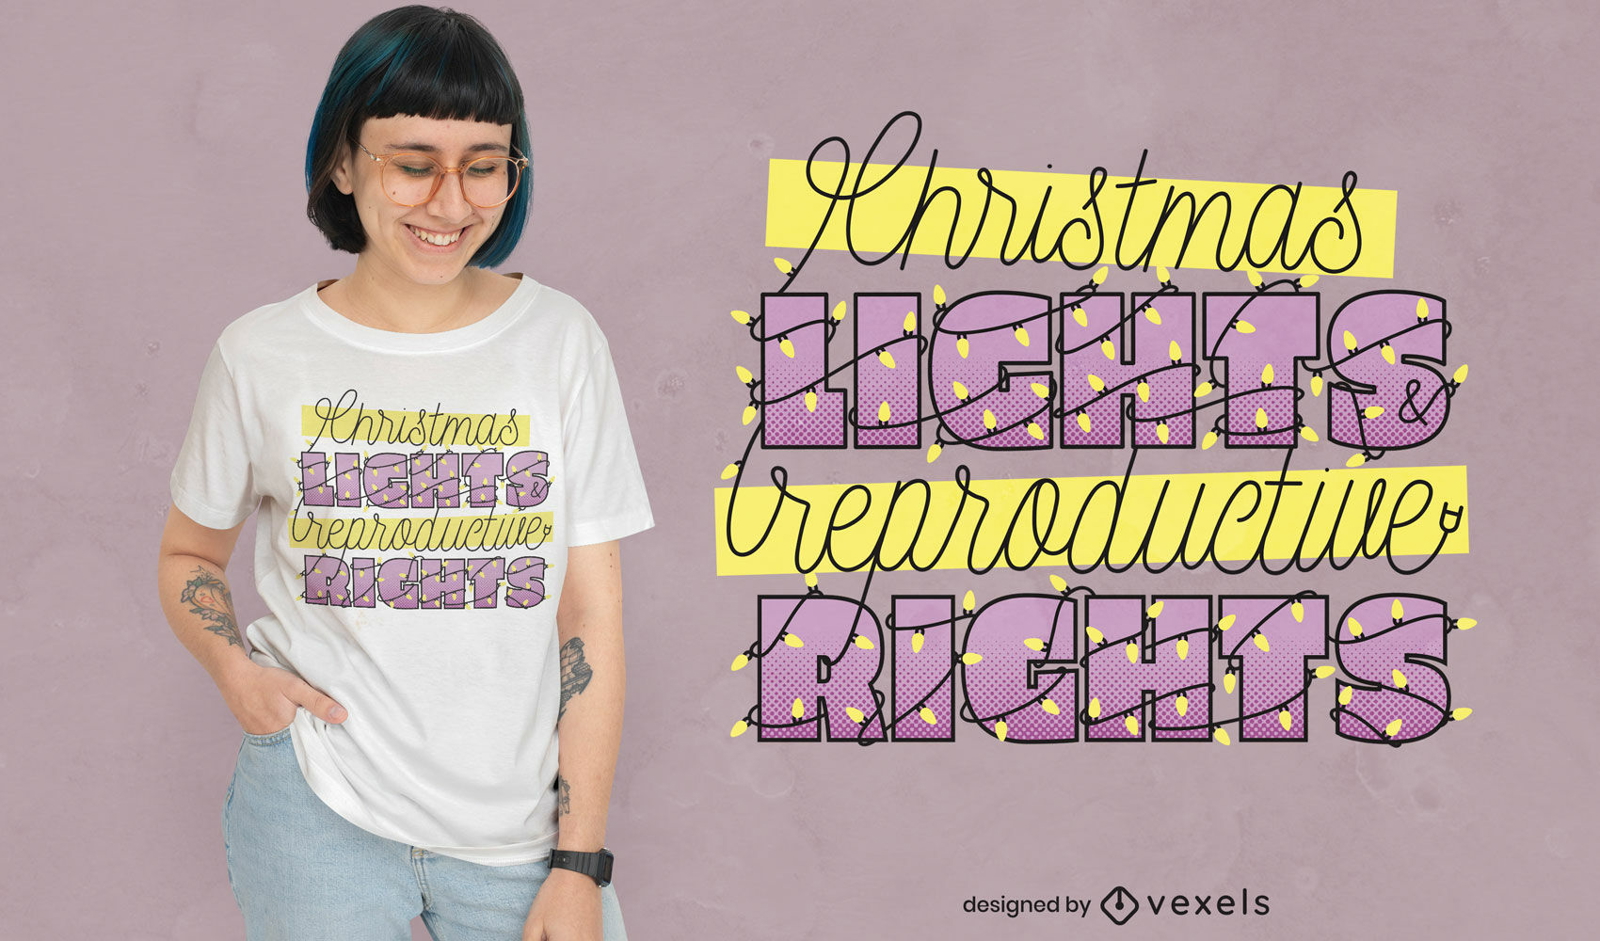 Reproductive rights Christmas t-shirt design